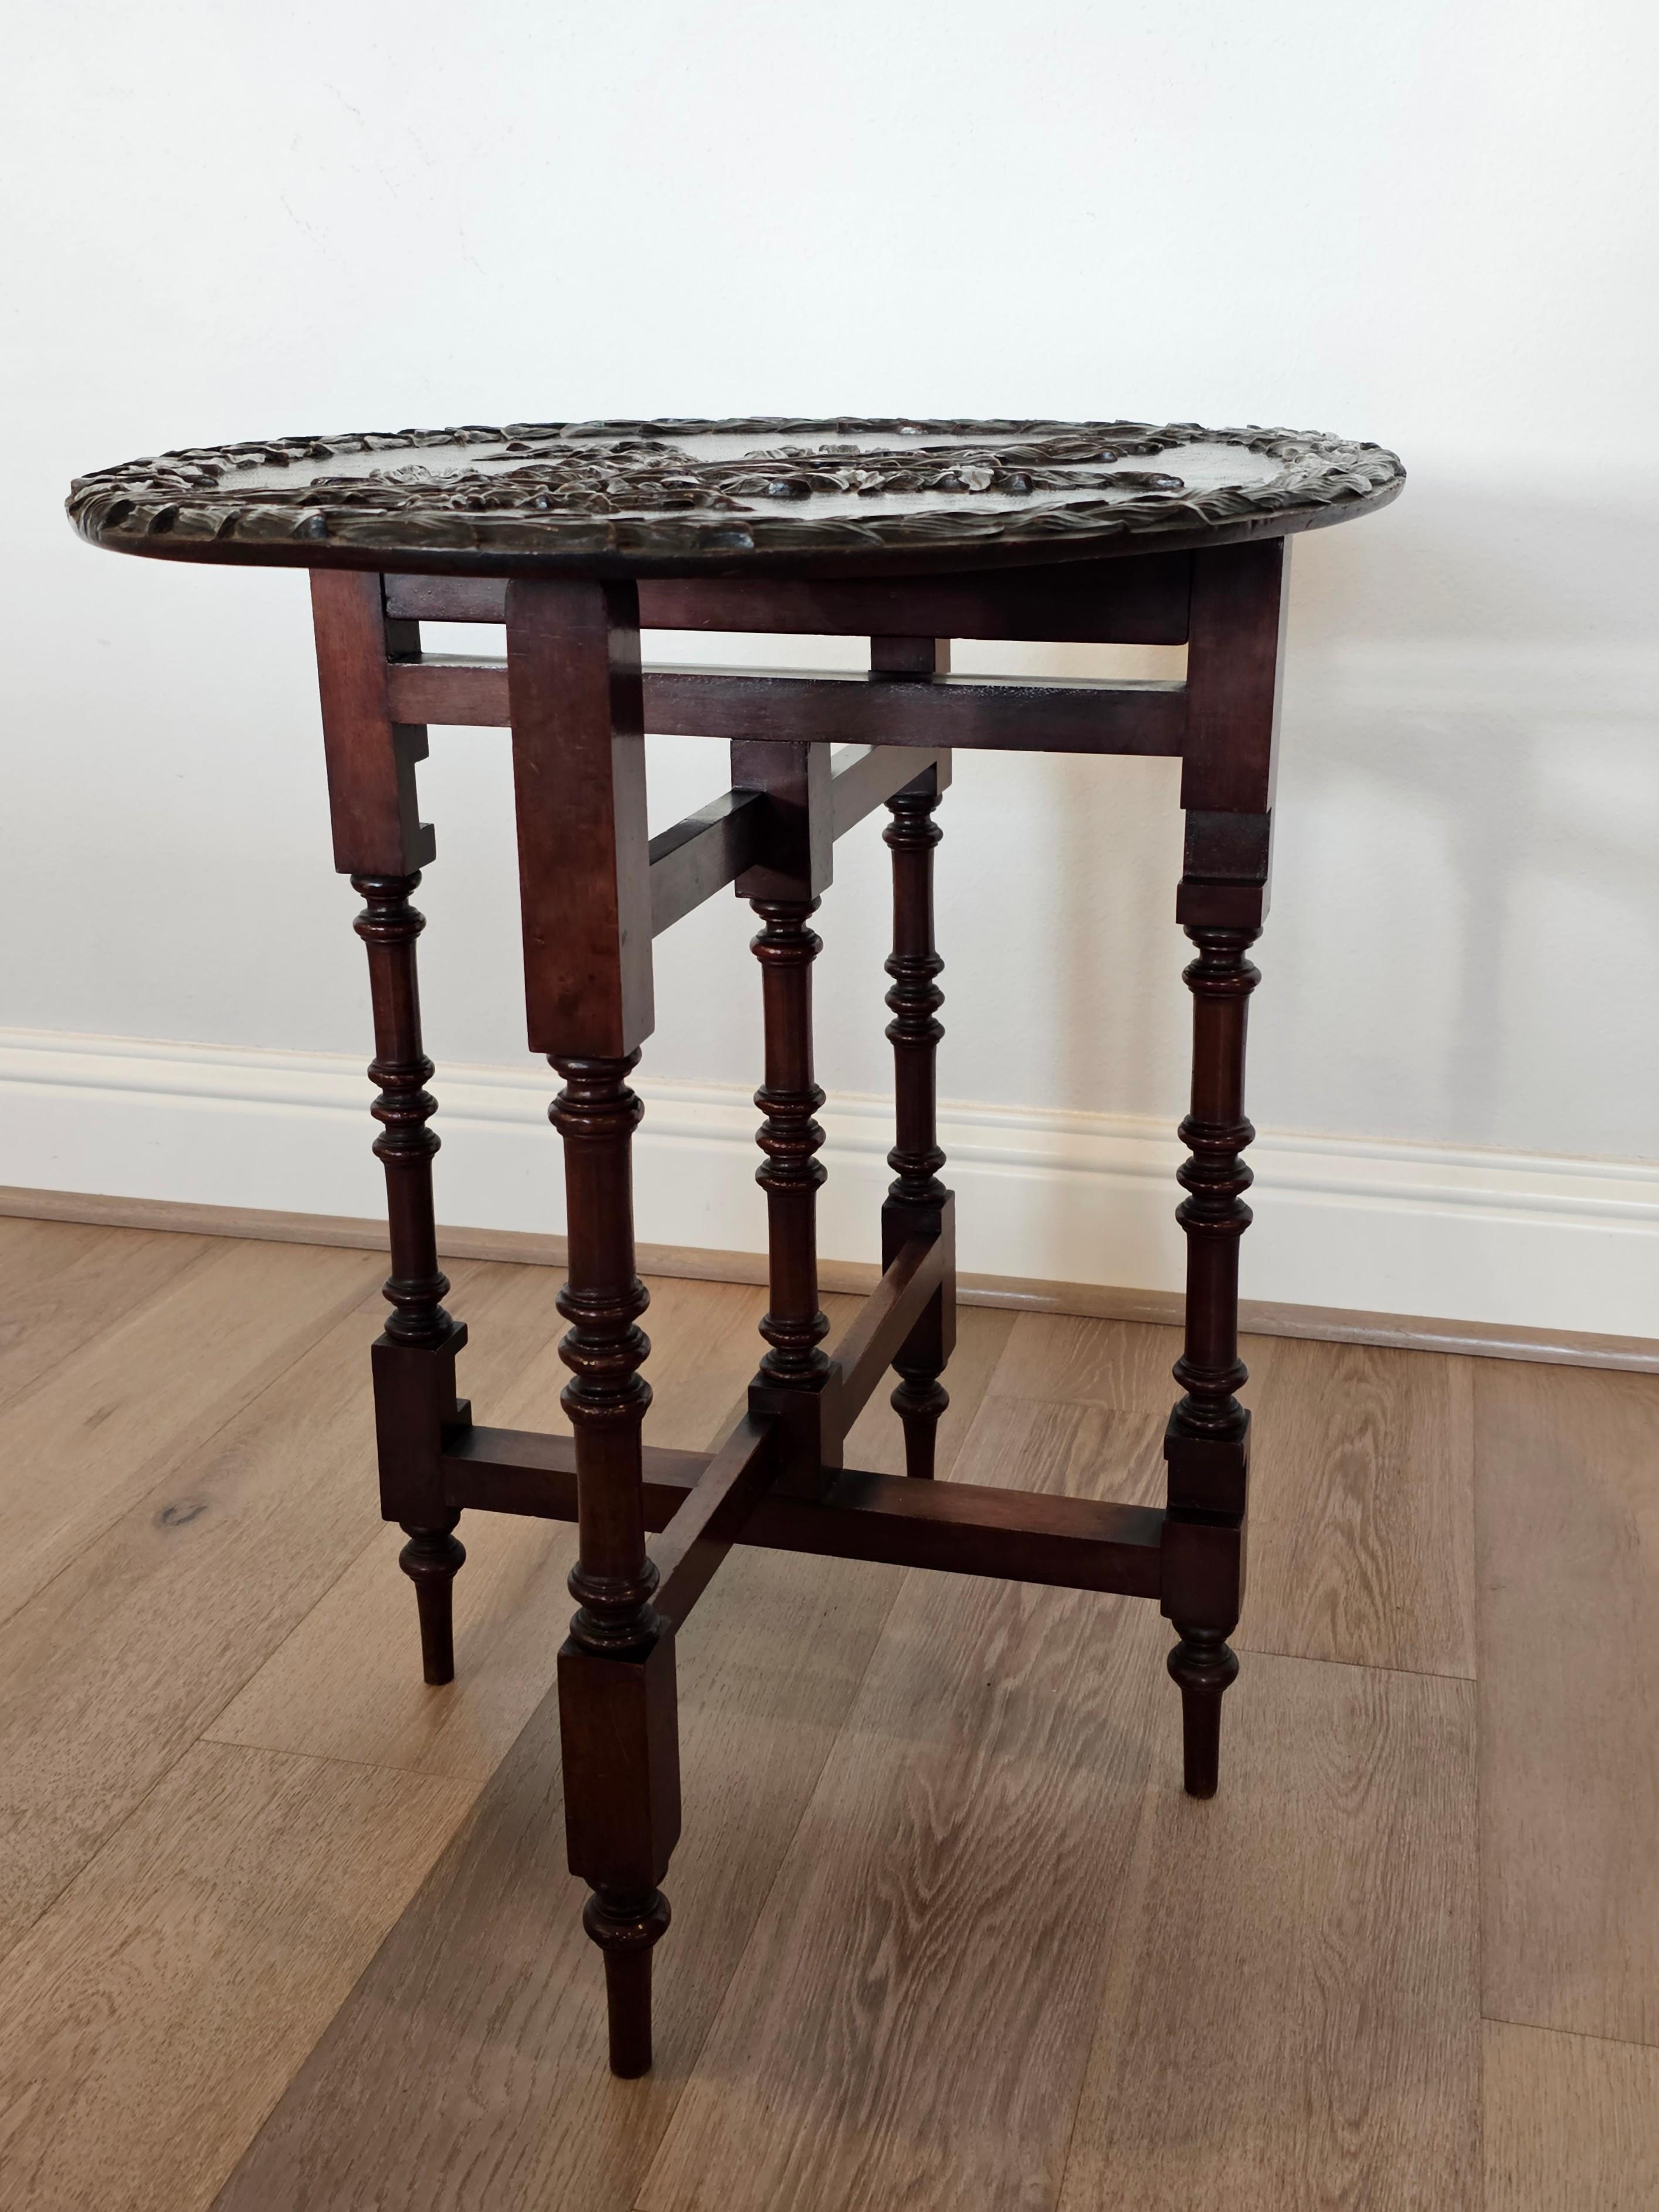 An antique English Victorian finely hand carved mahogany gateleg side table by Thomas Simpson and Son.

Born in England in the late 19th century, having a hinged oval tilt-top with intricate foliate relief carvings and incised detailing, folding